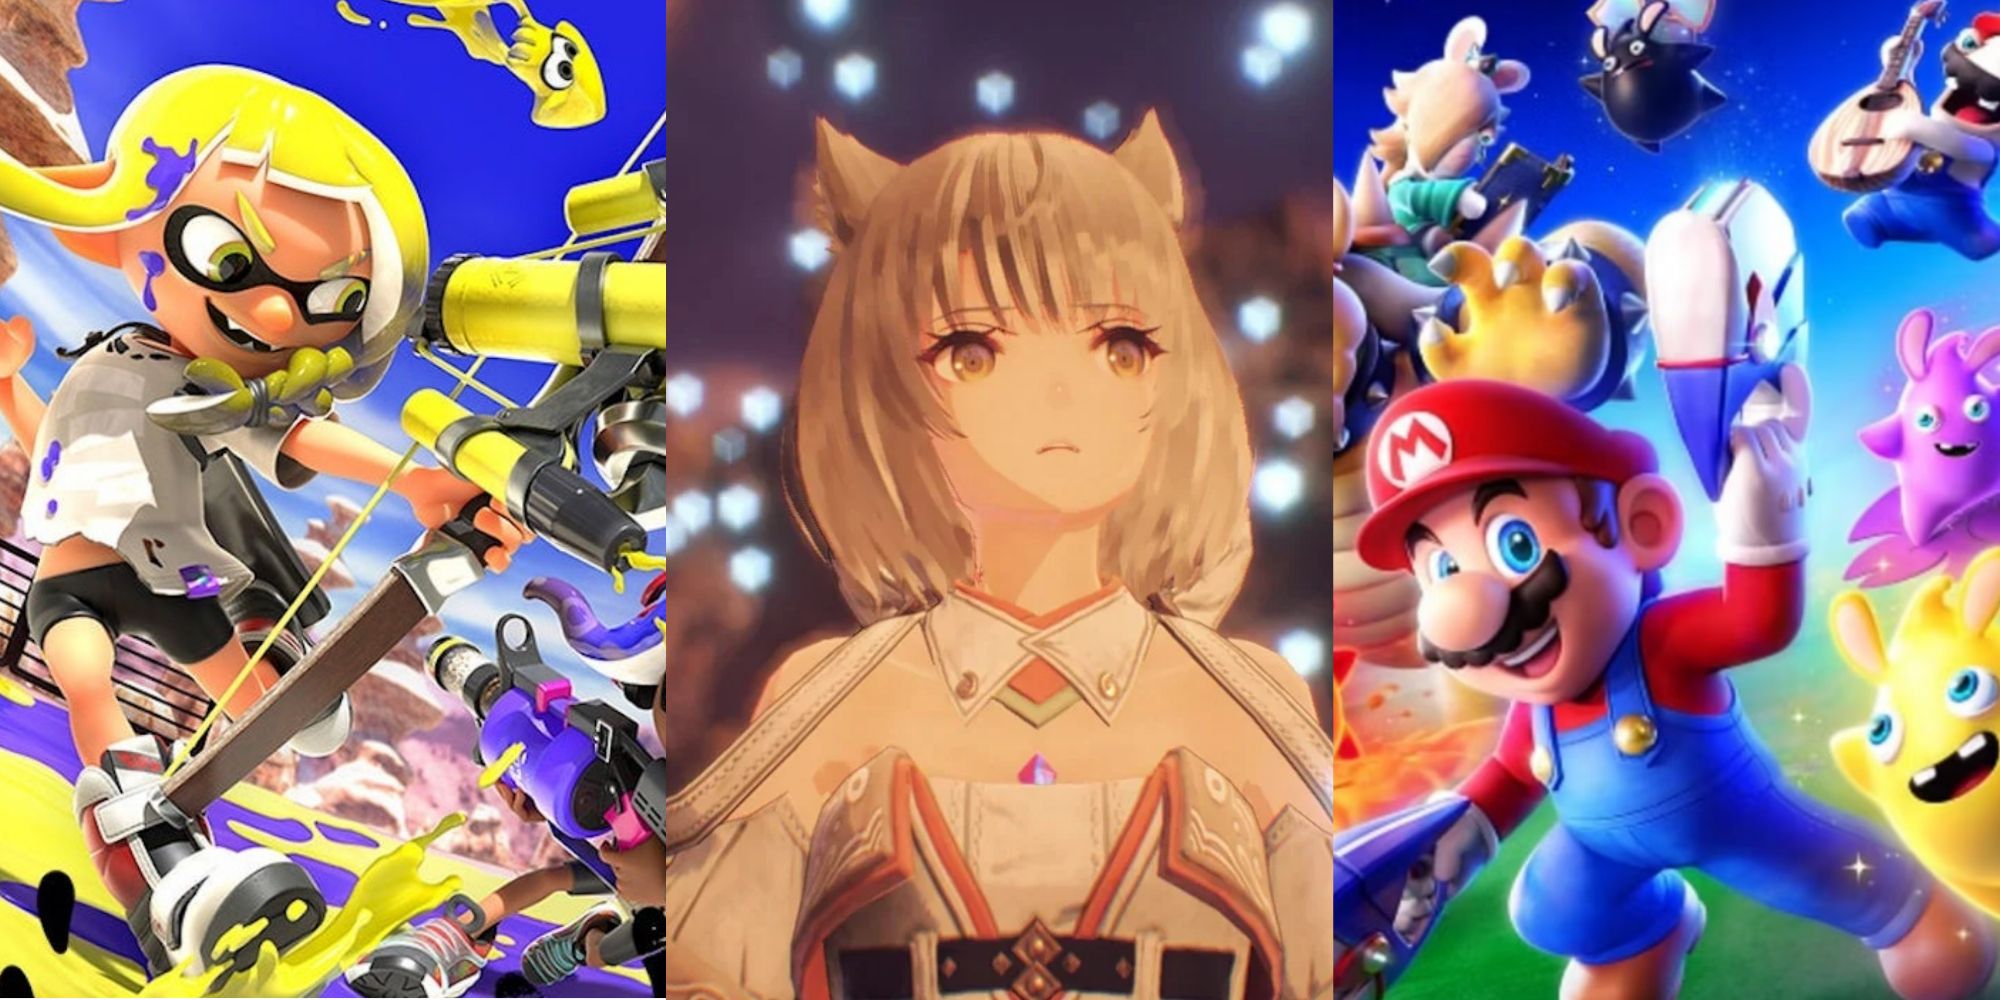 10 Best Anime Games On Switch Ranked